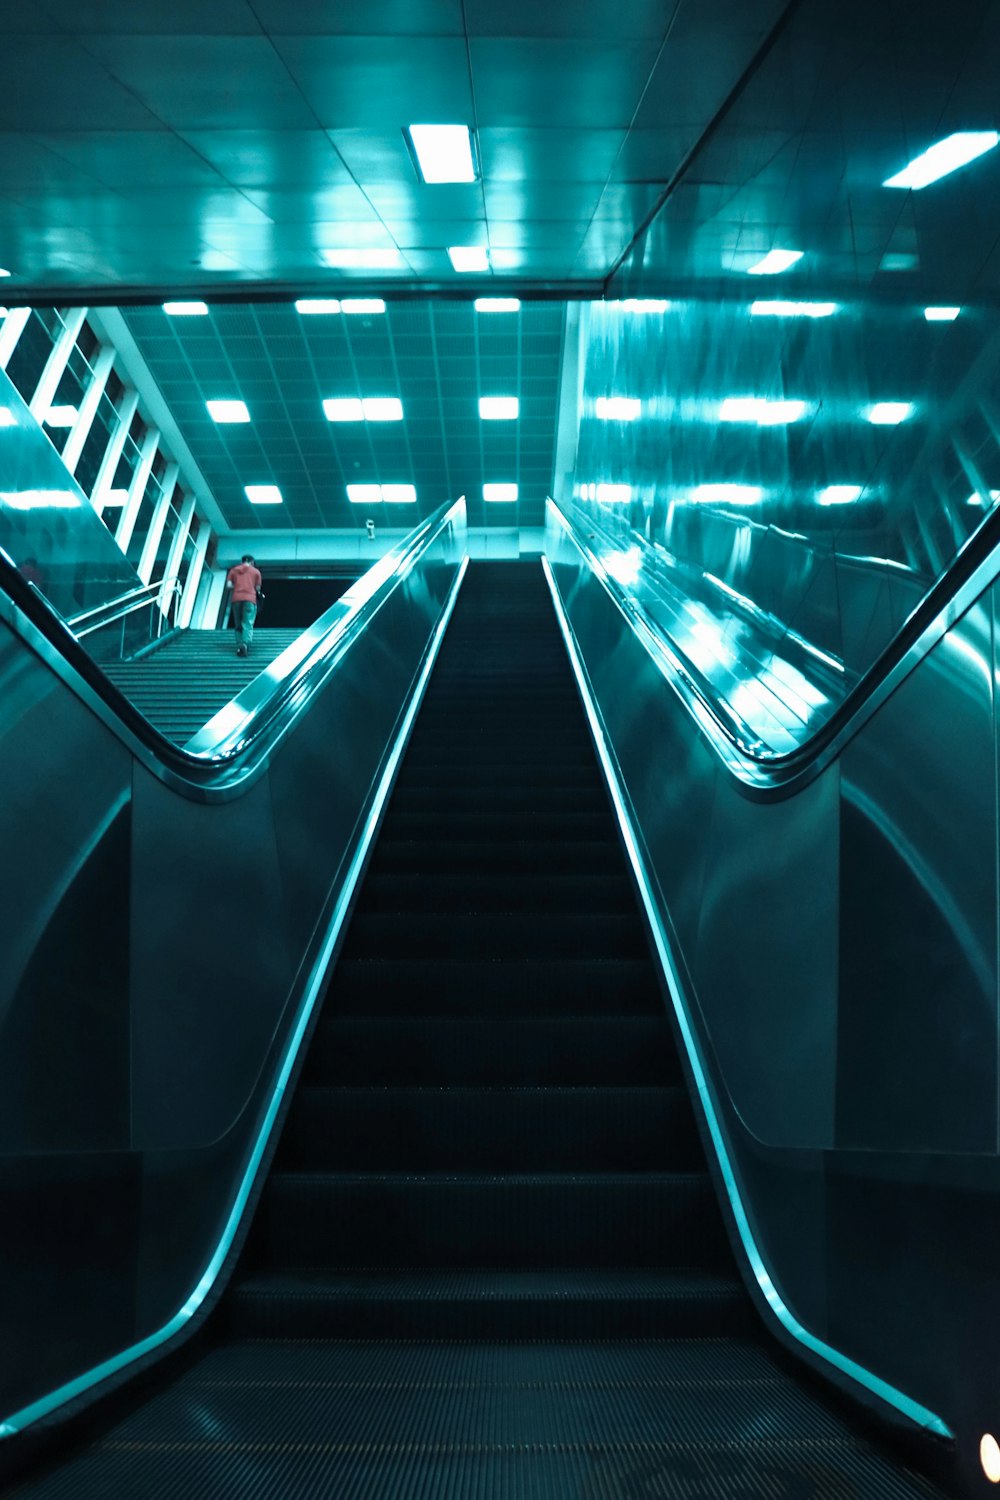 an escalator in a subway station with blue lights